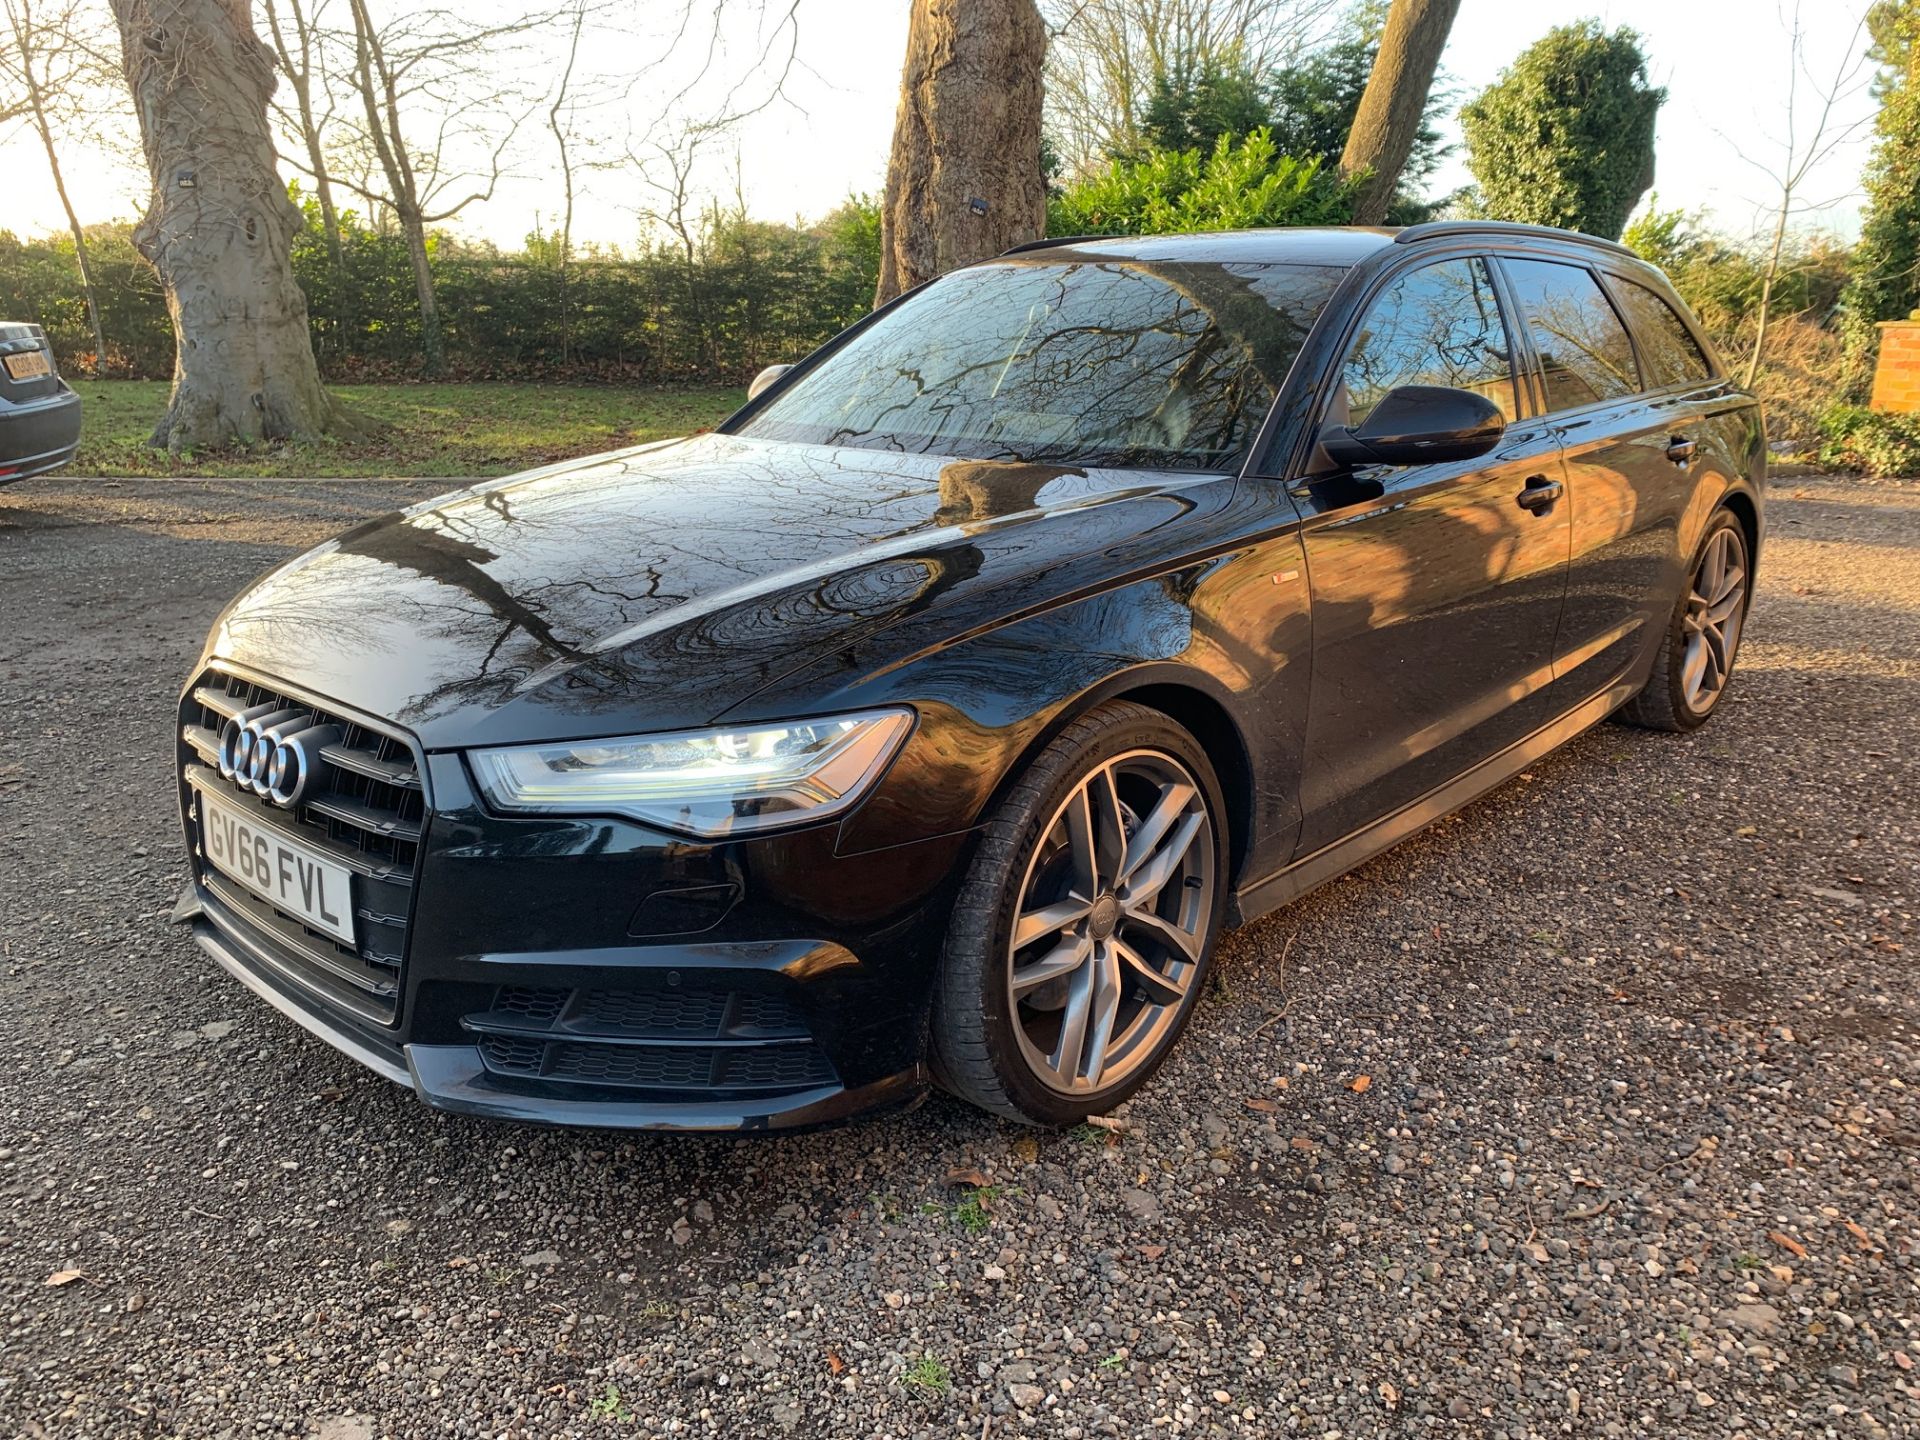 2016/66 REG AUDI A6 S LINE BLACK EDITION TDI QUATTRO 3.0 DIESEL ESTATE, SHOWING 2 FORMER KEEPERS - Image 4 of 24